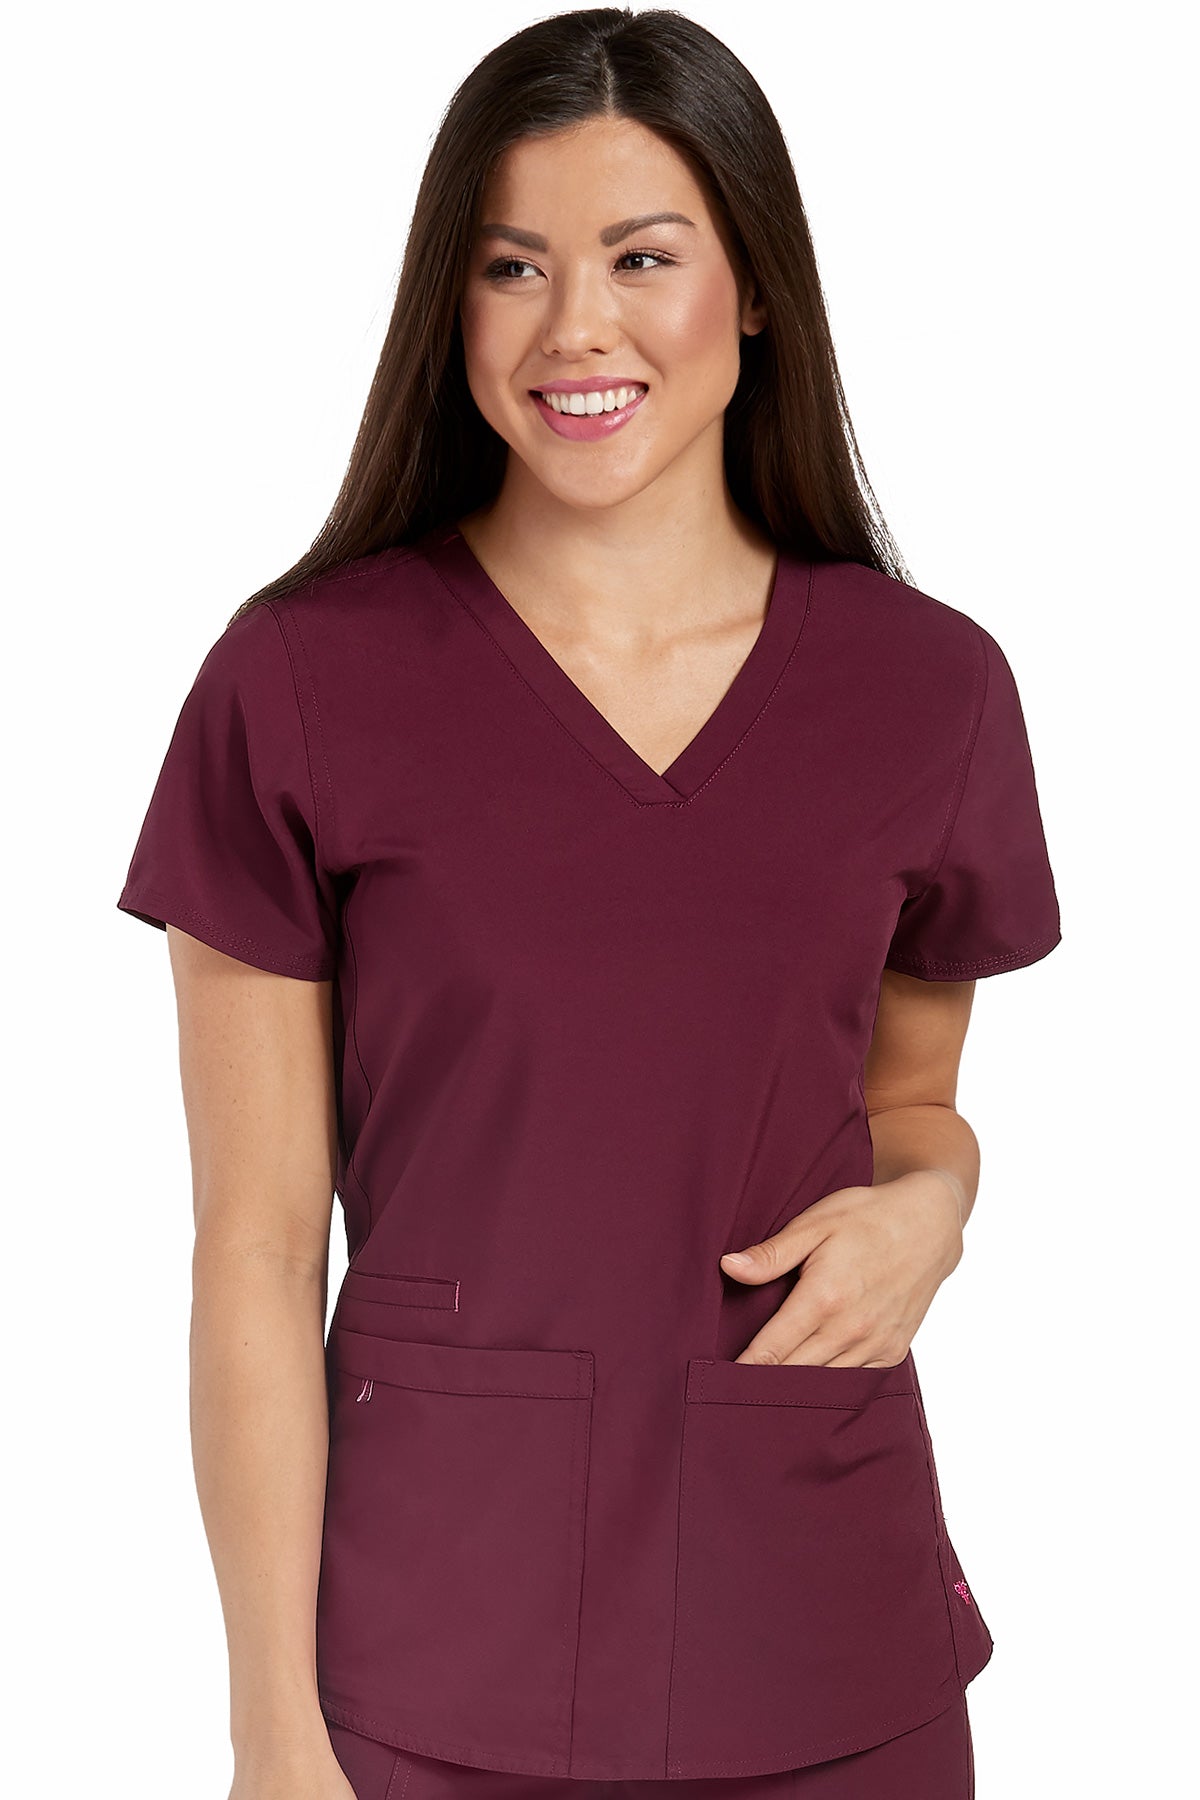 Racerback Shirttail Top by Med Couture XS-5XL / WINE